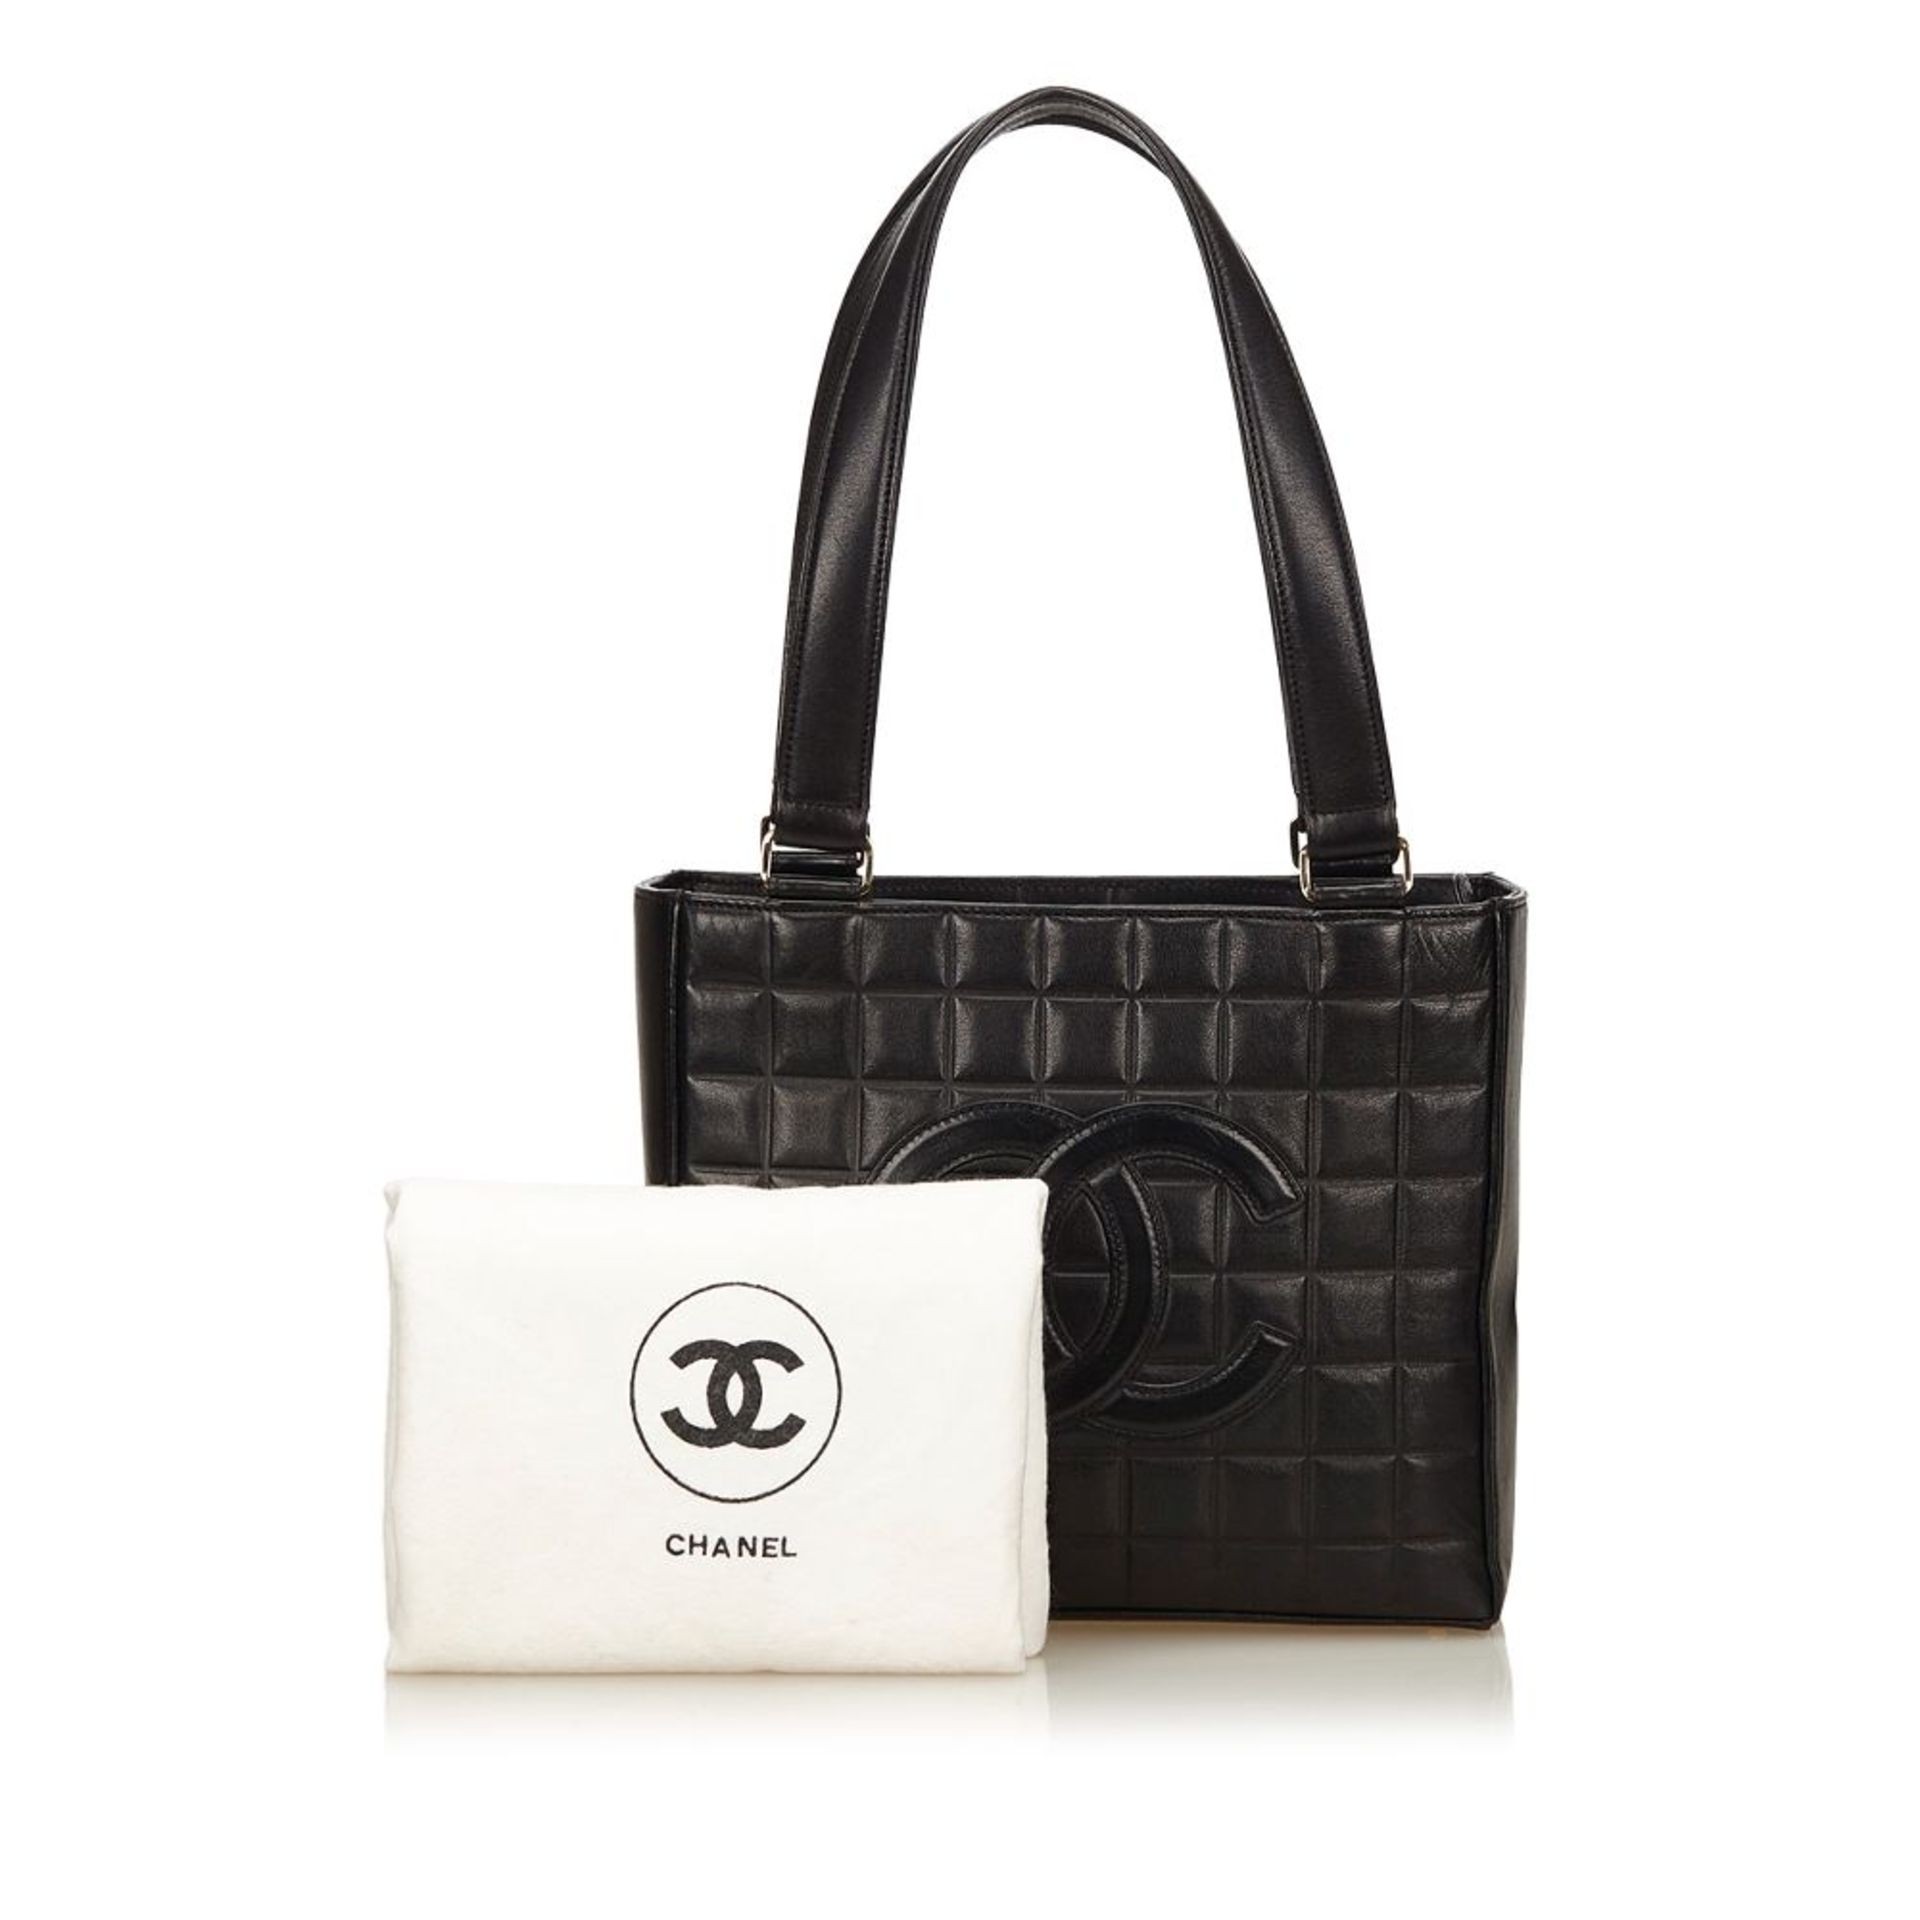 A Chanel 'Choco Bar' leather shoulder bag,with a leather body, a flat leather strap, an open top, - Image 4 of 4